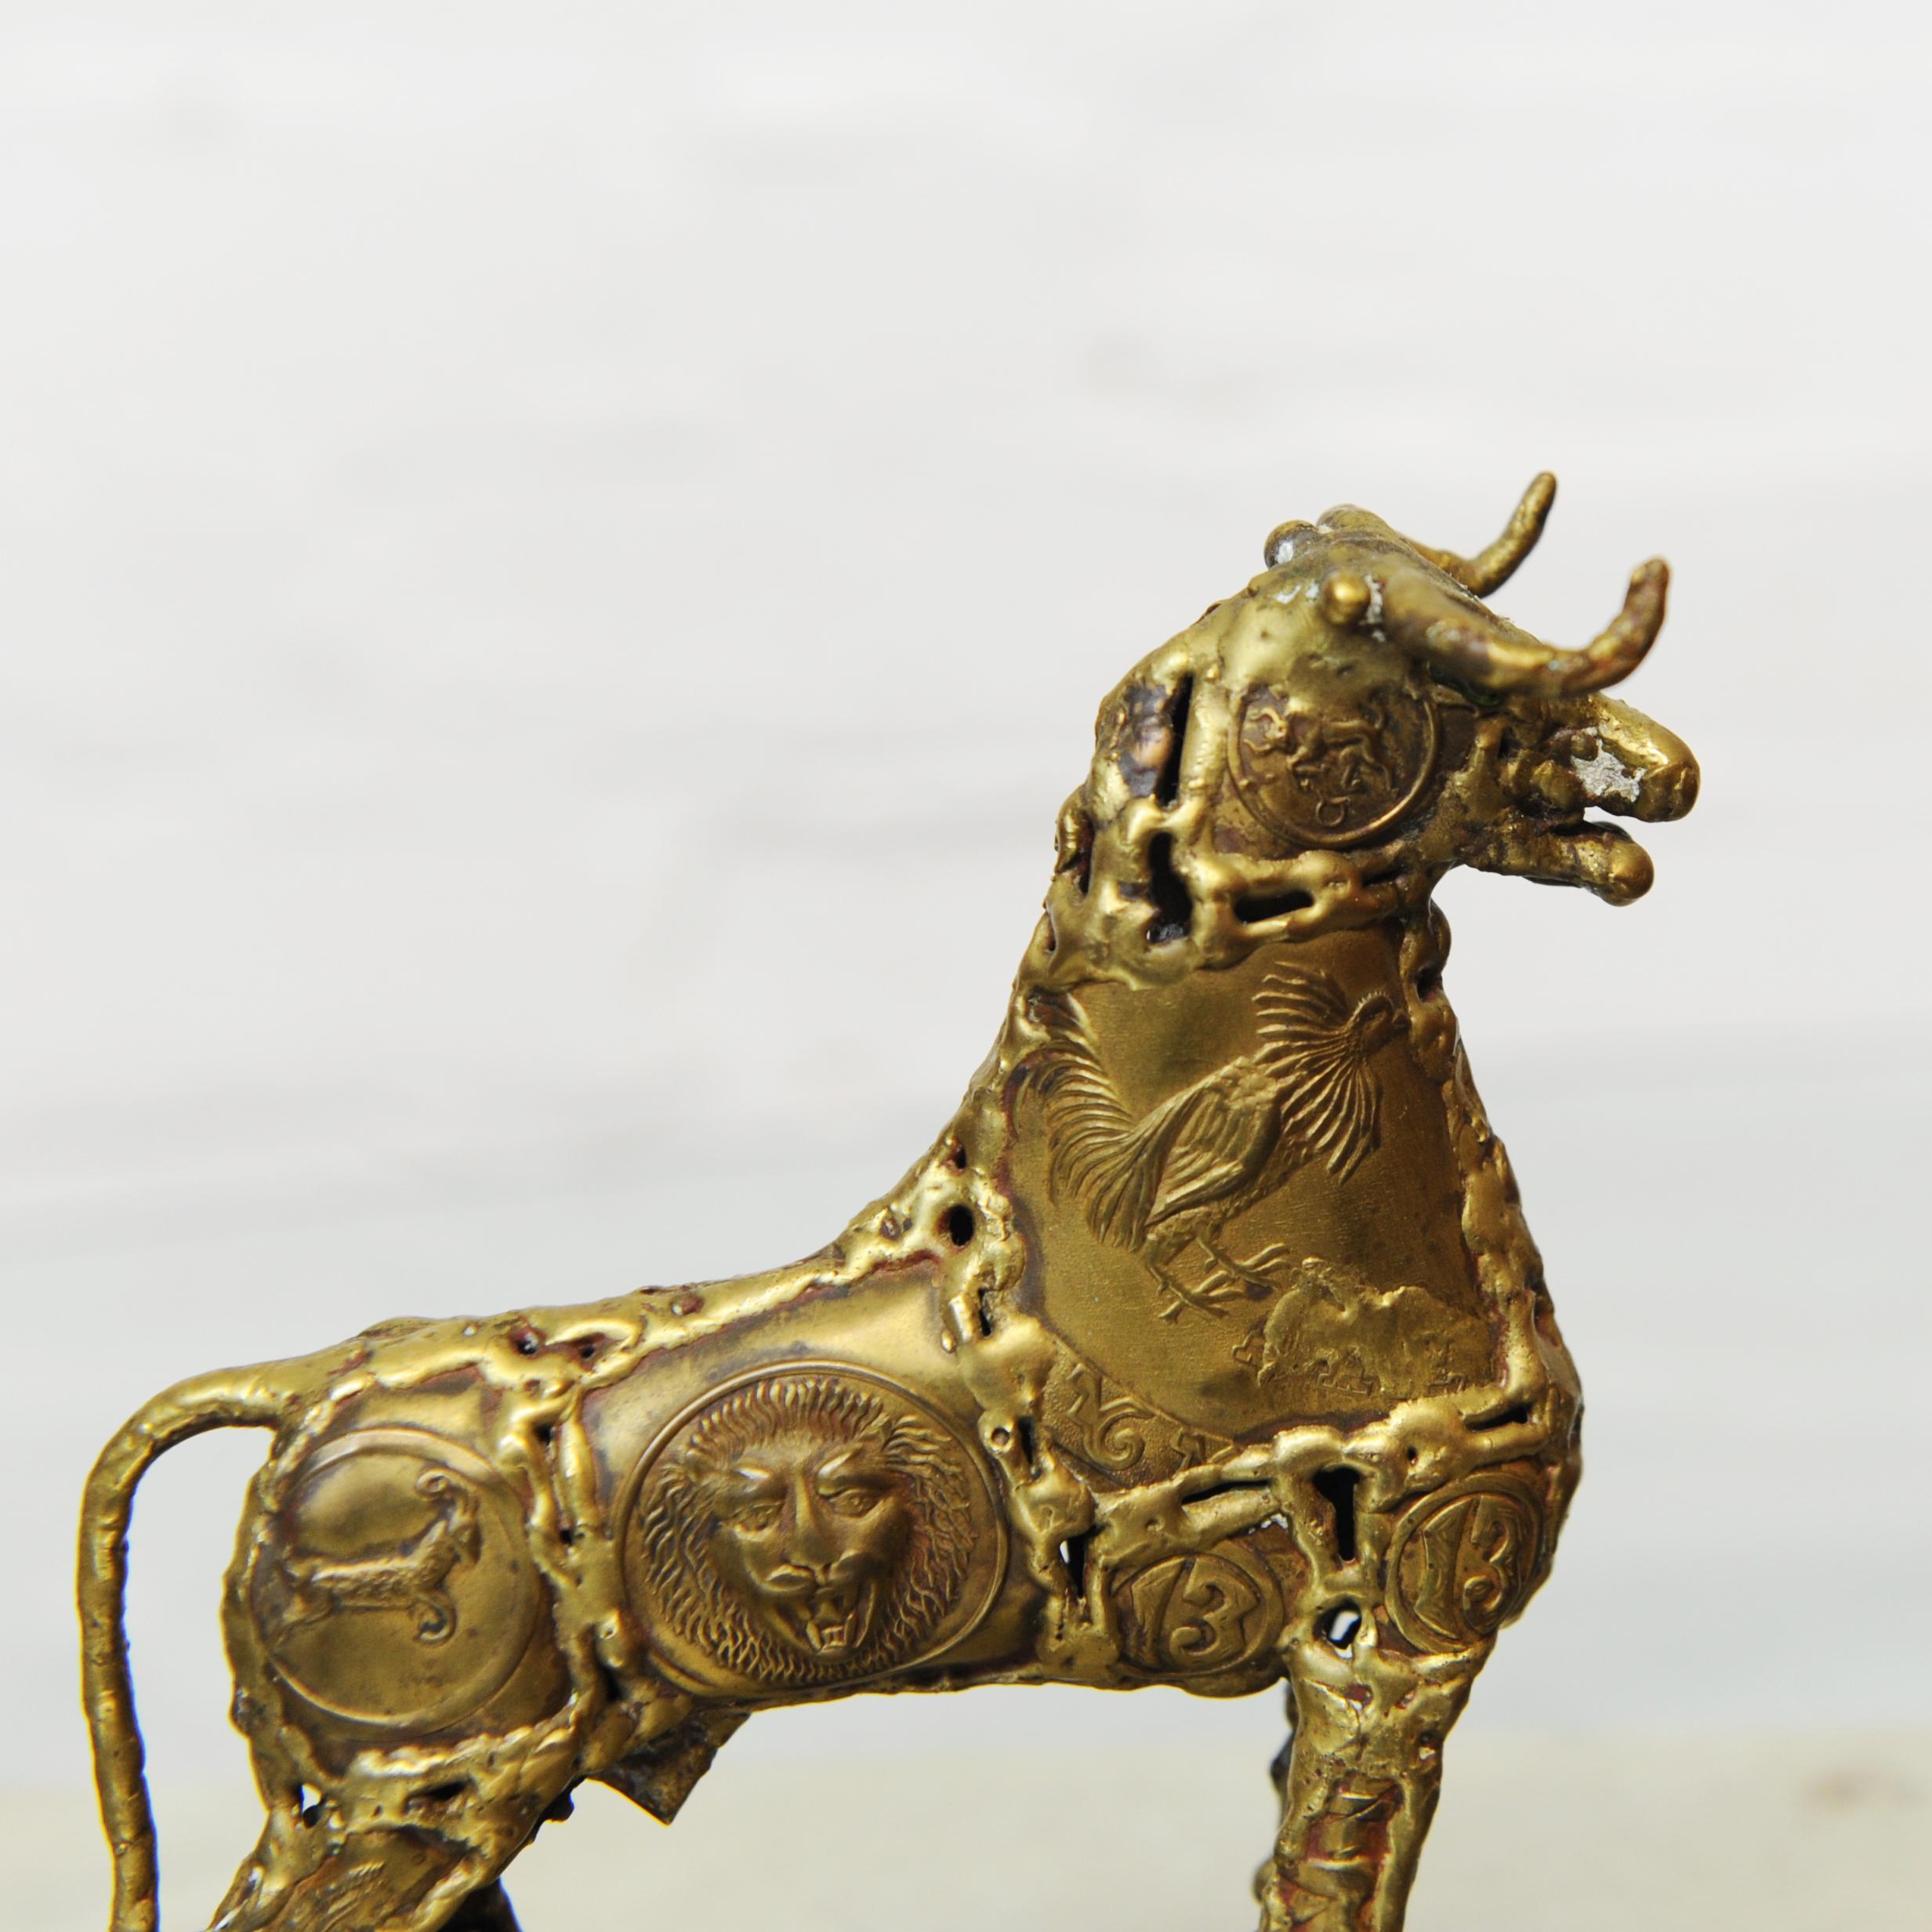 Brutalist Metal Sculpture of a Brass Bull by Pal Kepenyes, 1970s For Sale 4